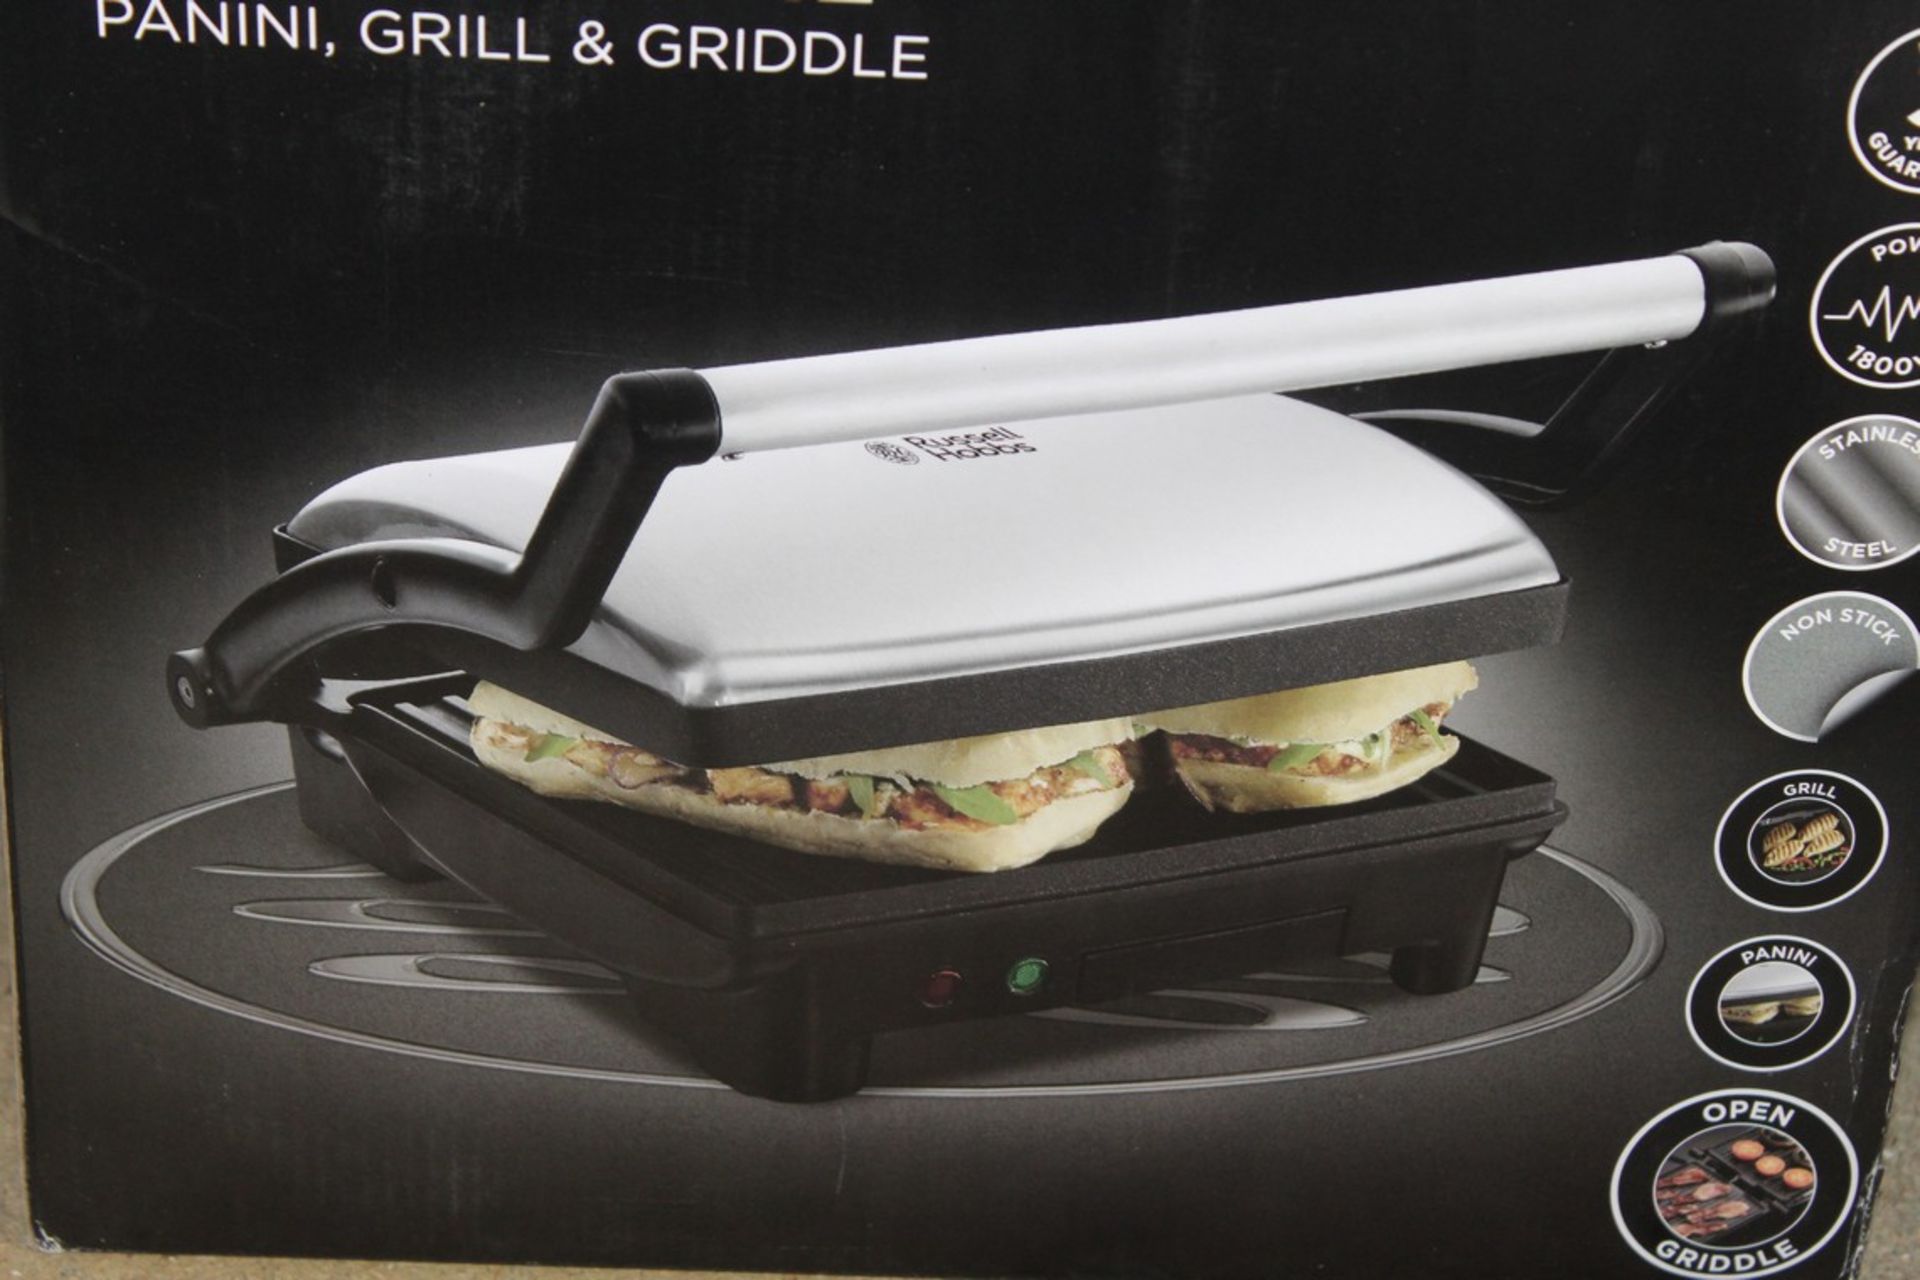 Boxed Russell Hobbs 3 In 1 Pannini Grill And Griddle Hot Plate RRP £50 (Untested Customer Return) (